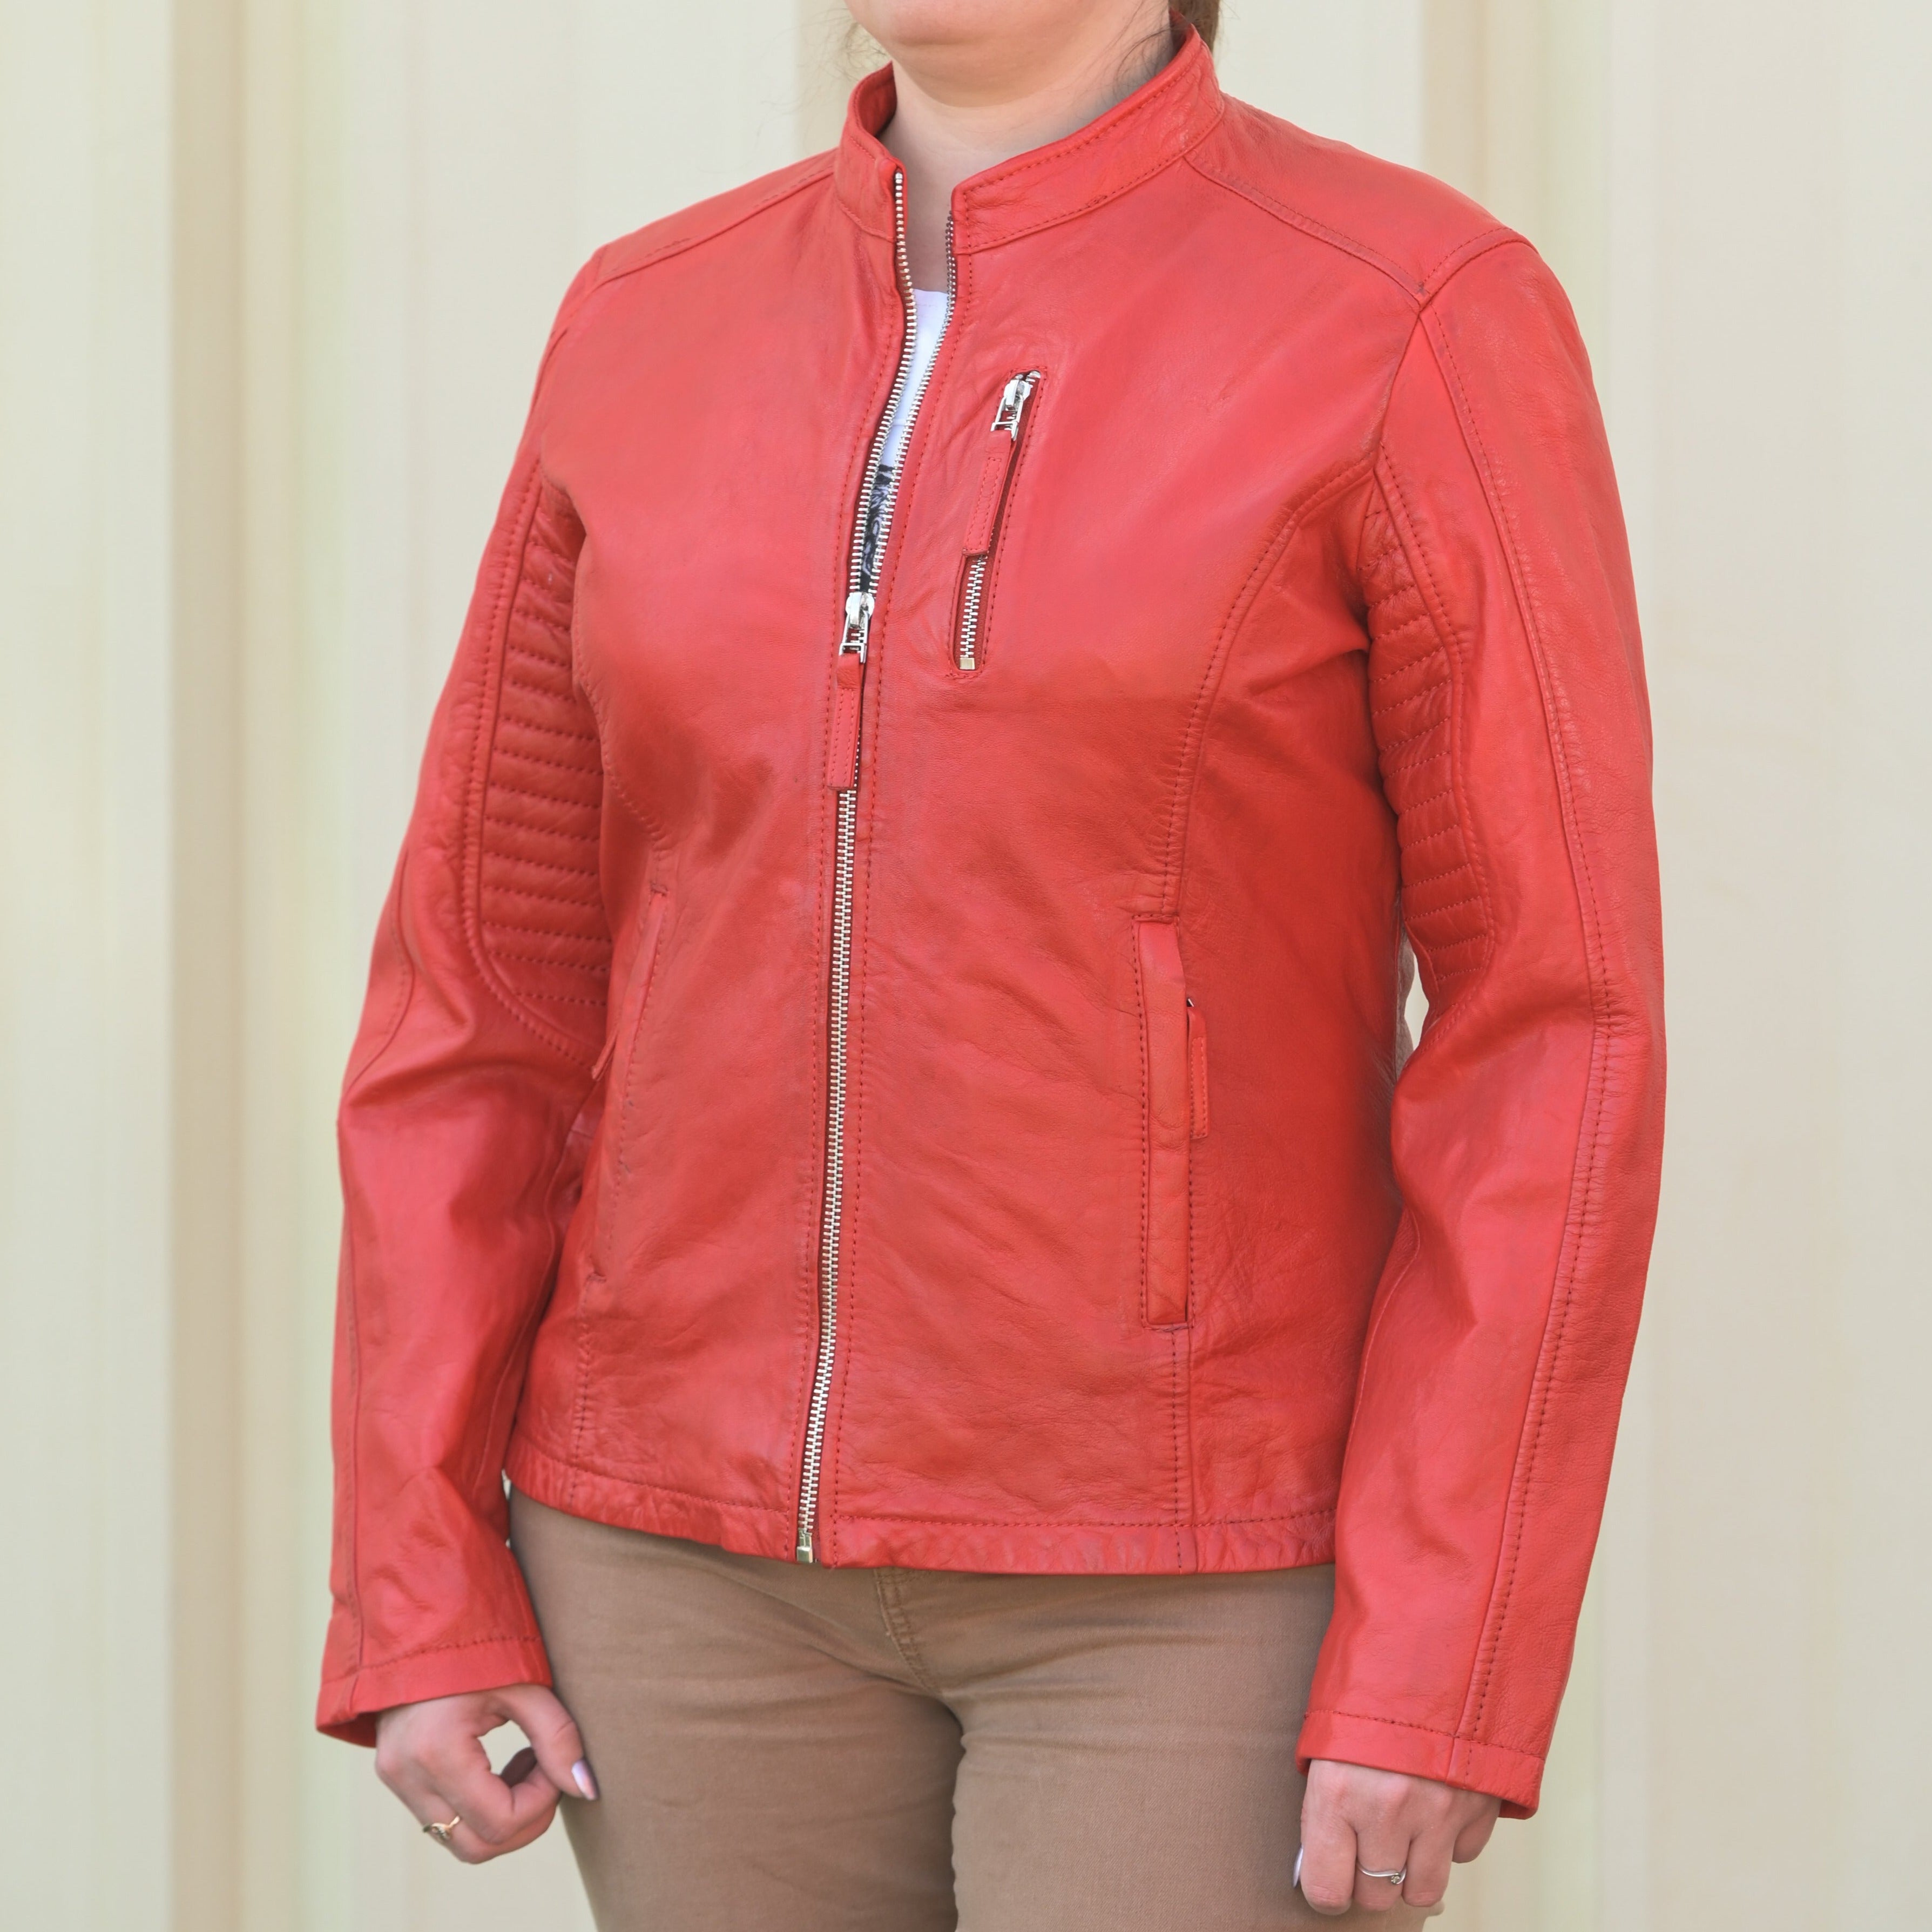 Women's Classic Leather Jacket - Boutique of Leathers/Open Road